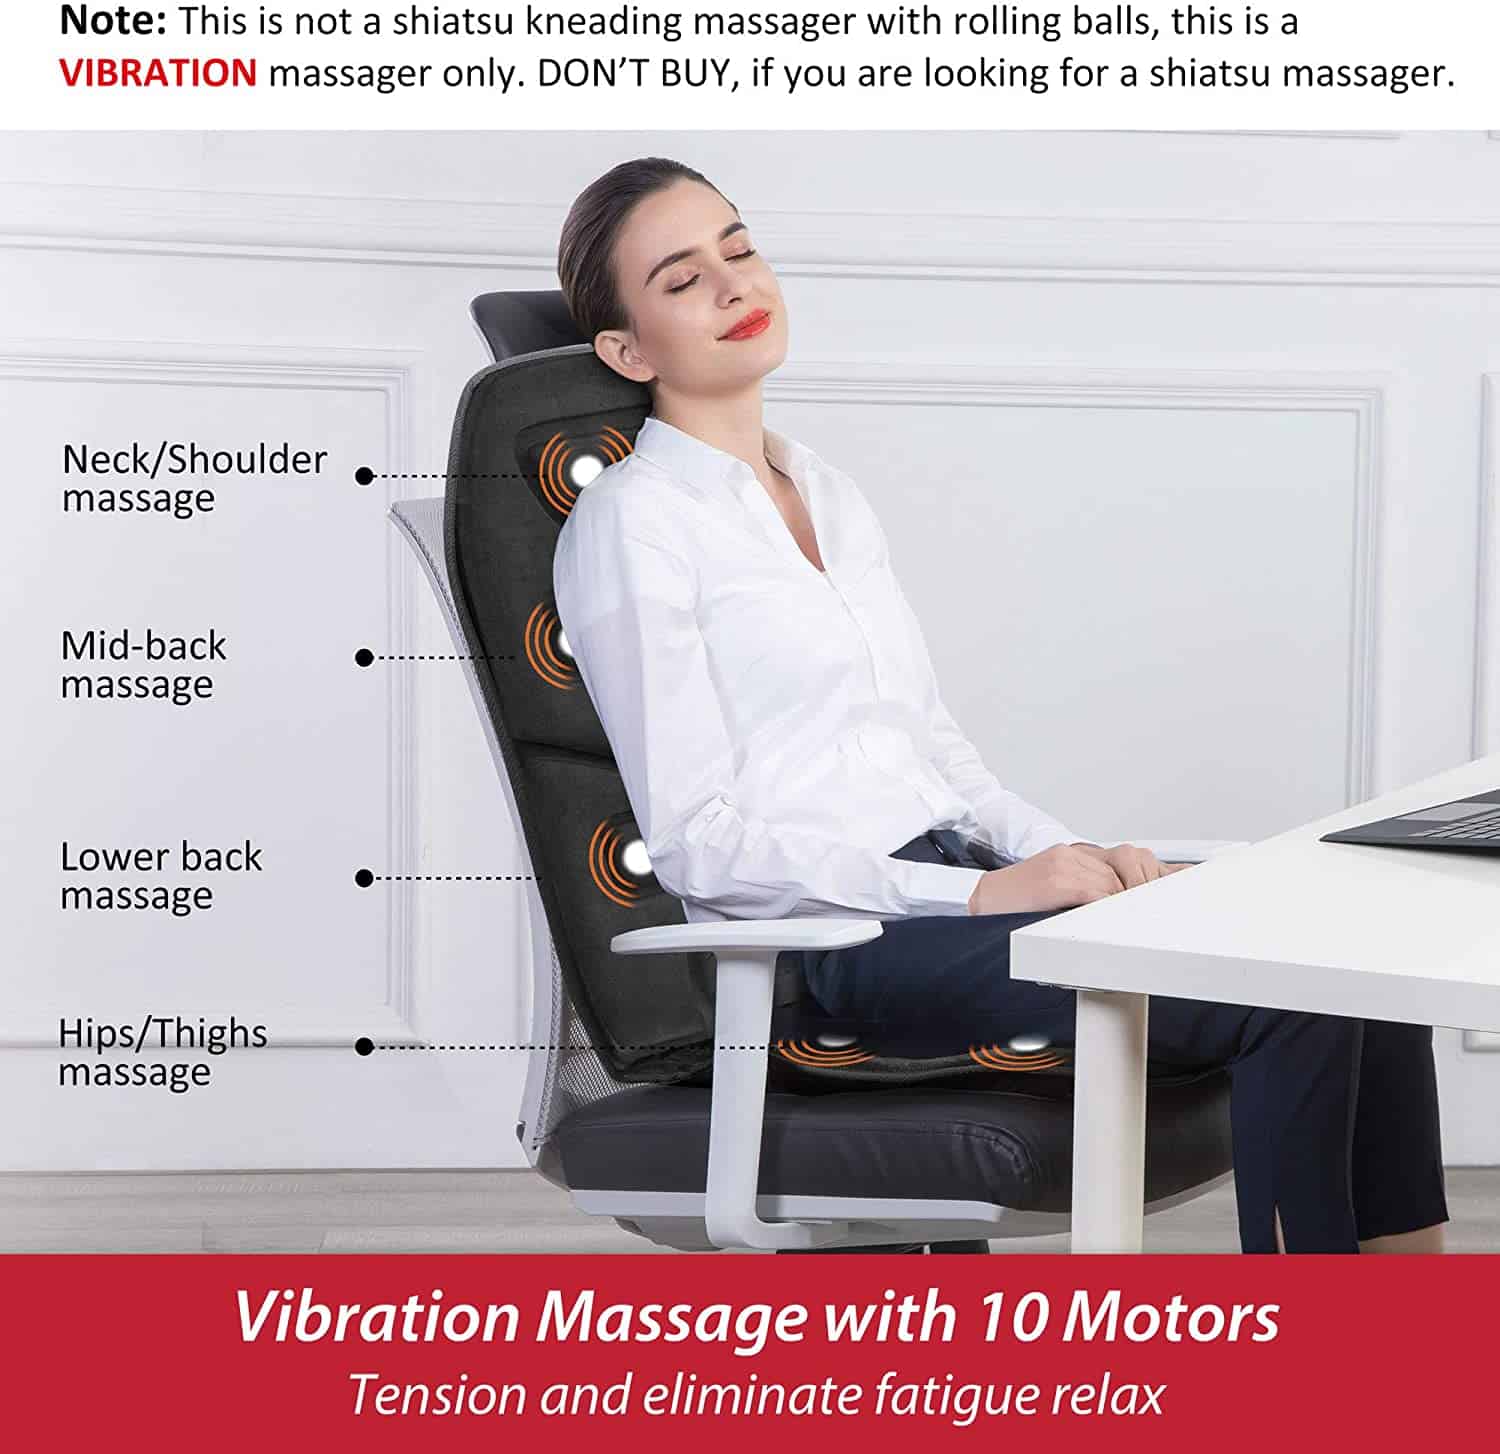 Comfier 4D Shiatsu Neck and Shoulder Massager with Heat Deep Kneading Massage for Body Relax Use at Home, Car, Office, Size: 6 x 10 x 3, Gray